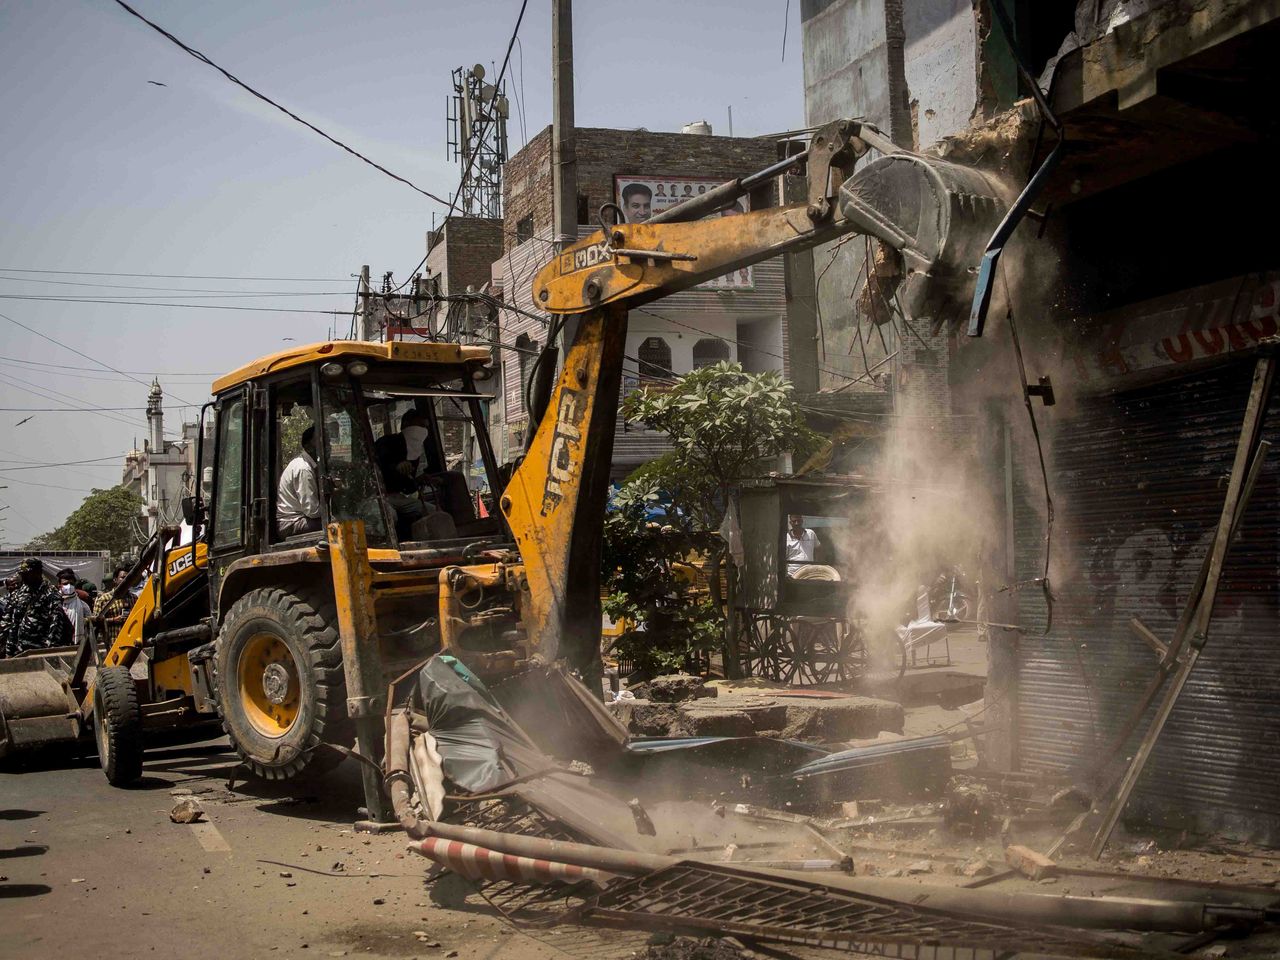 Bulldozers raze structures during a demolition drive against encroachment at a communal clash affected neighbourhood in Jahangir Puri in New Delhi on April 20, 2022. Bulldozers continued razing property for nearly two hours after India's chief justice issued an order to halt.